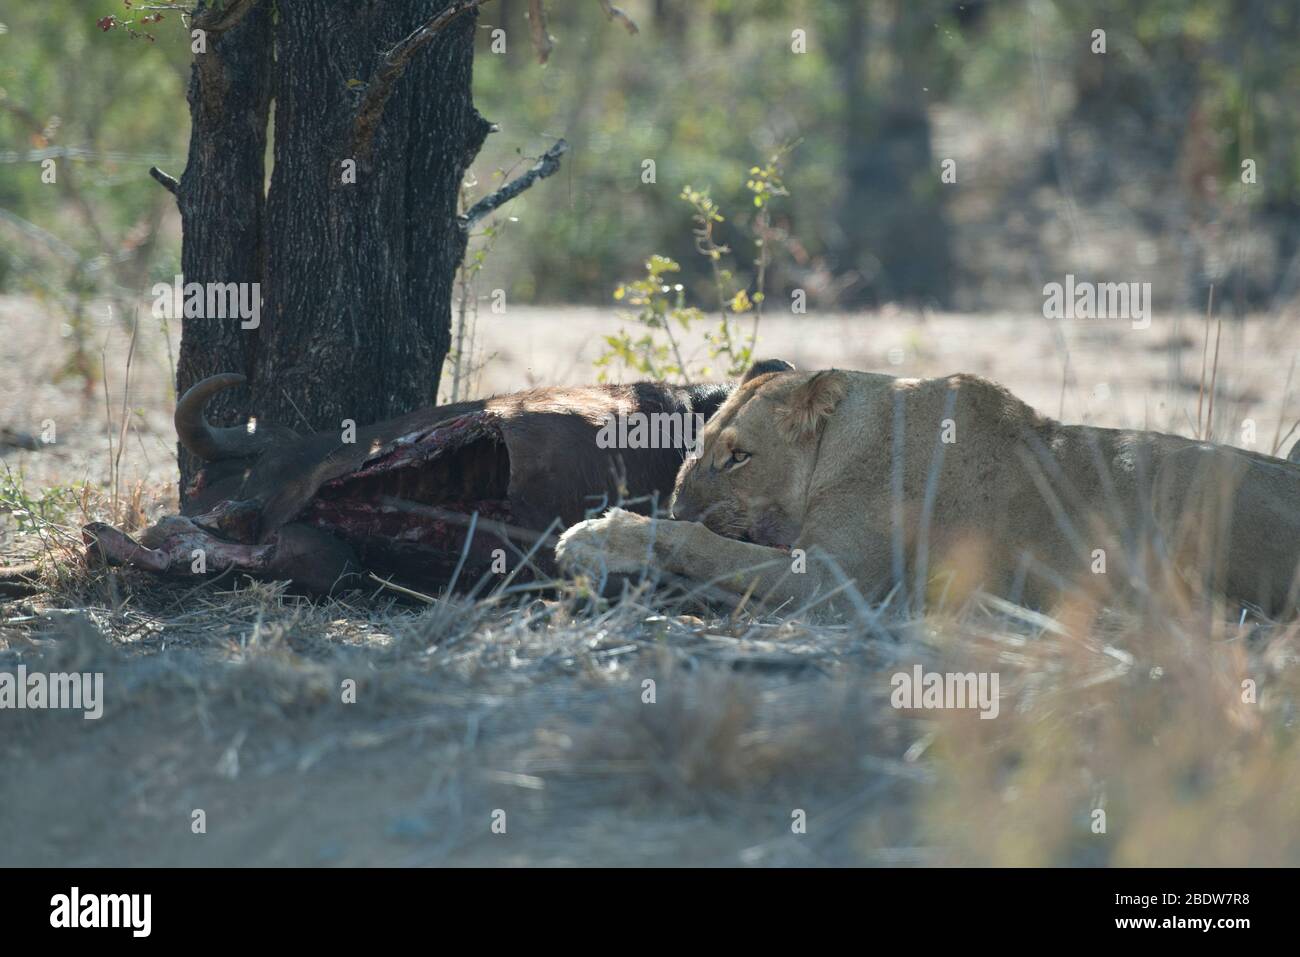 Lioness, Panthera leo, eating kill, Kruger National Park, Mpumalanga province, South Africa, Africa Stock Photo